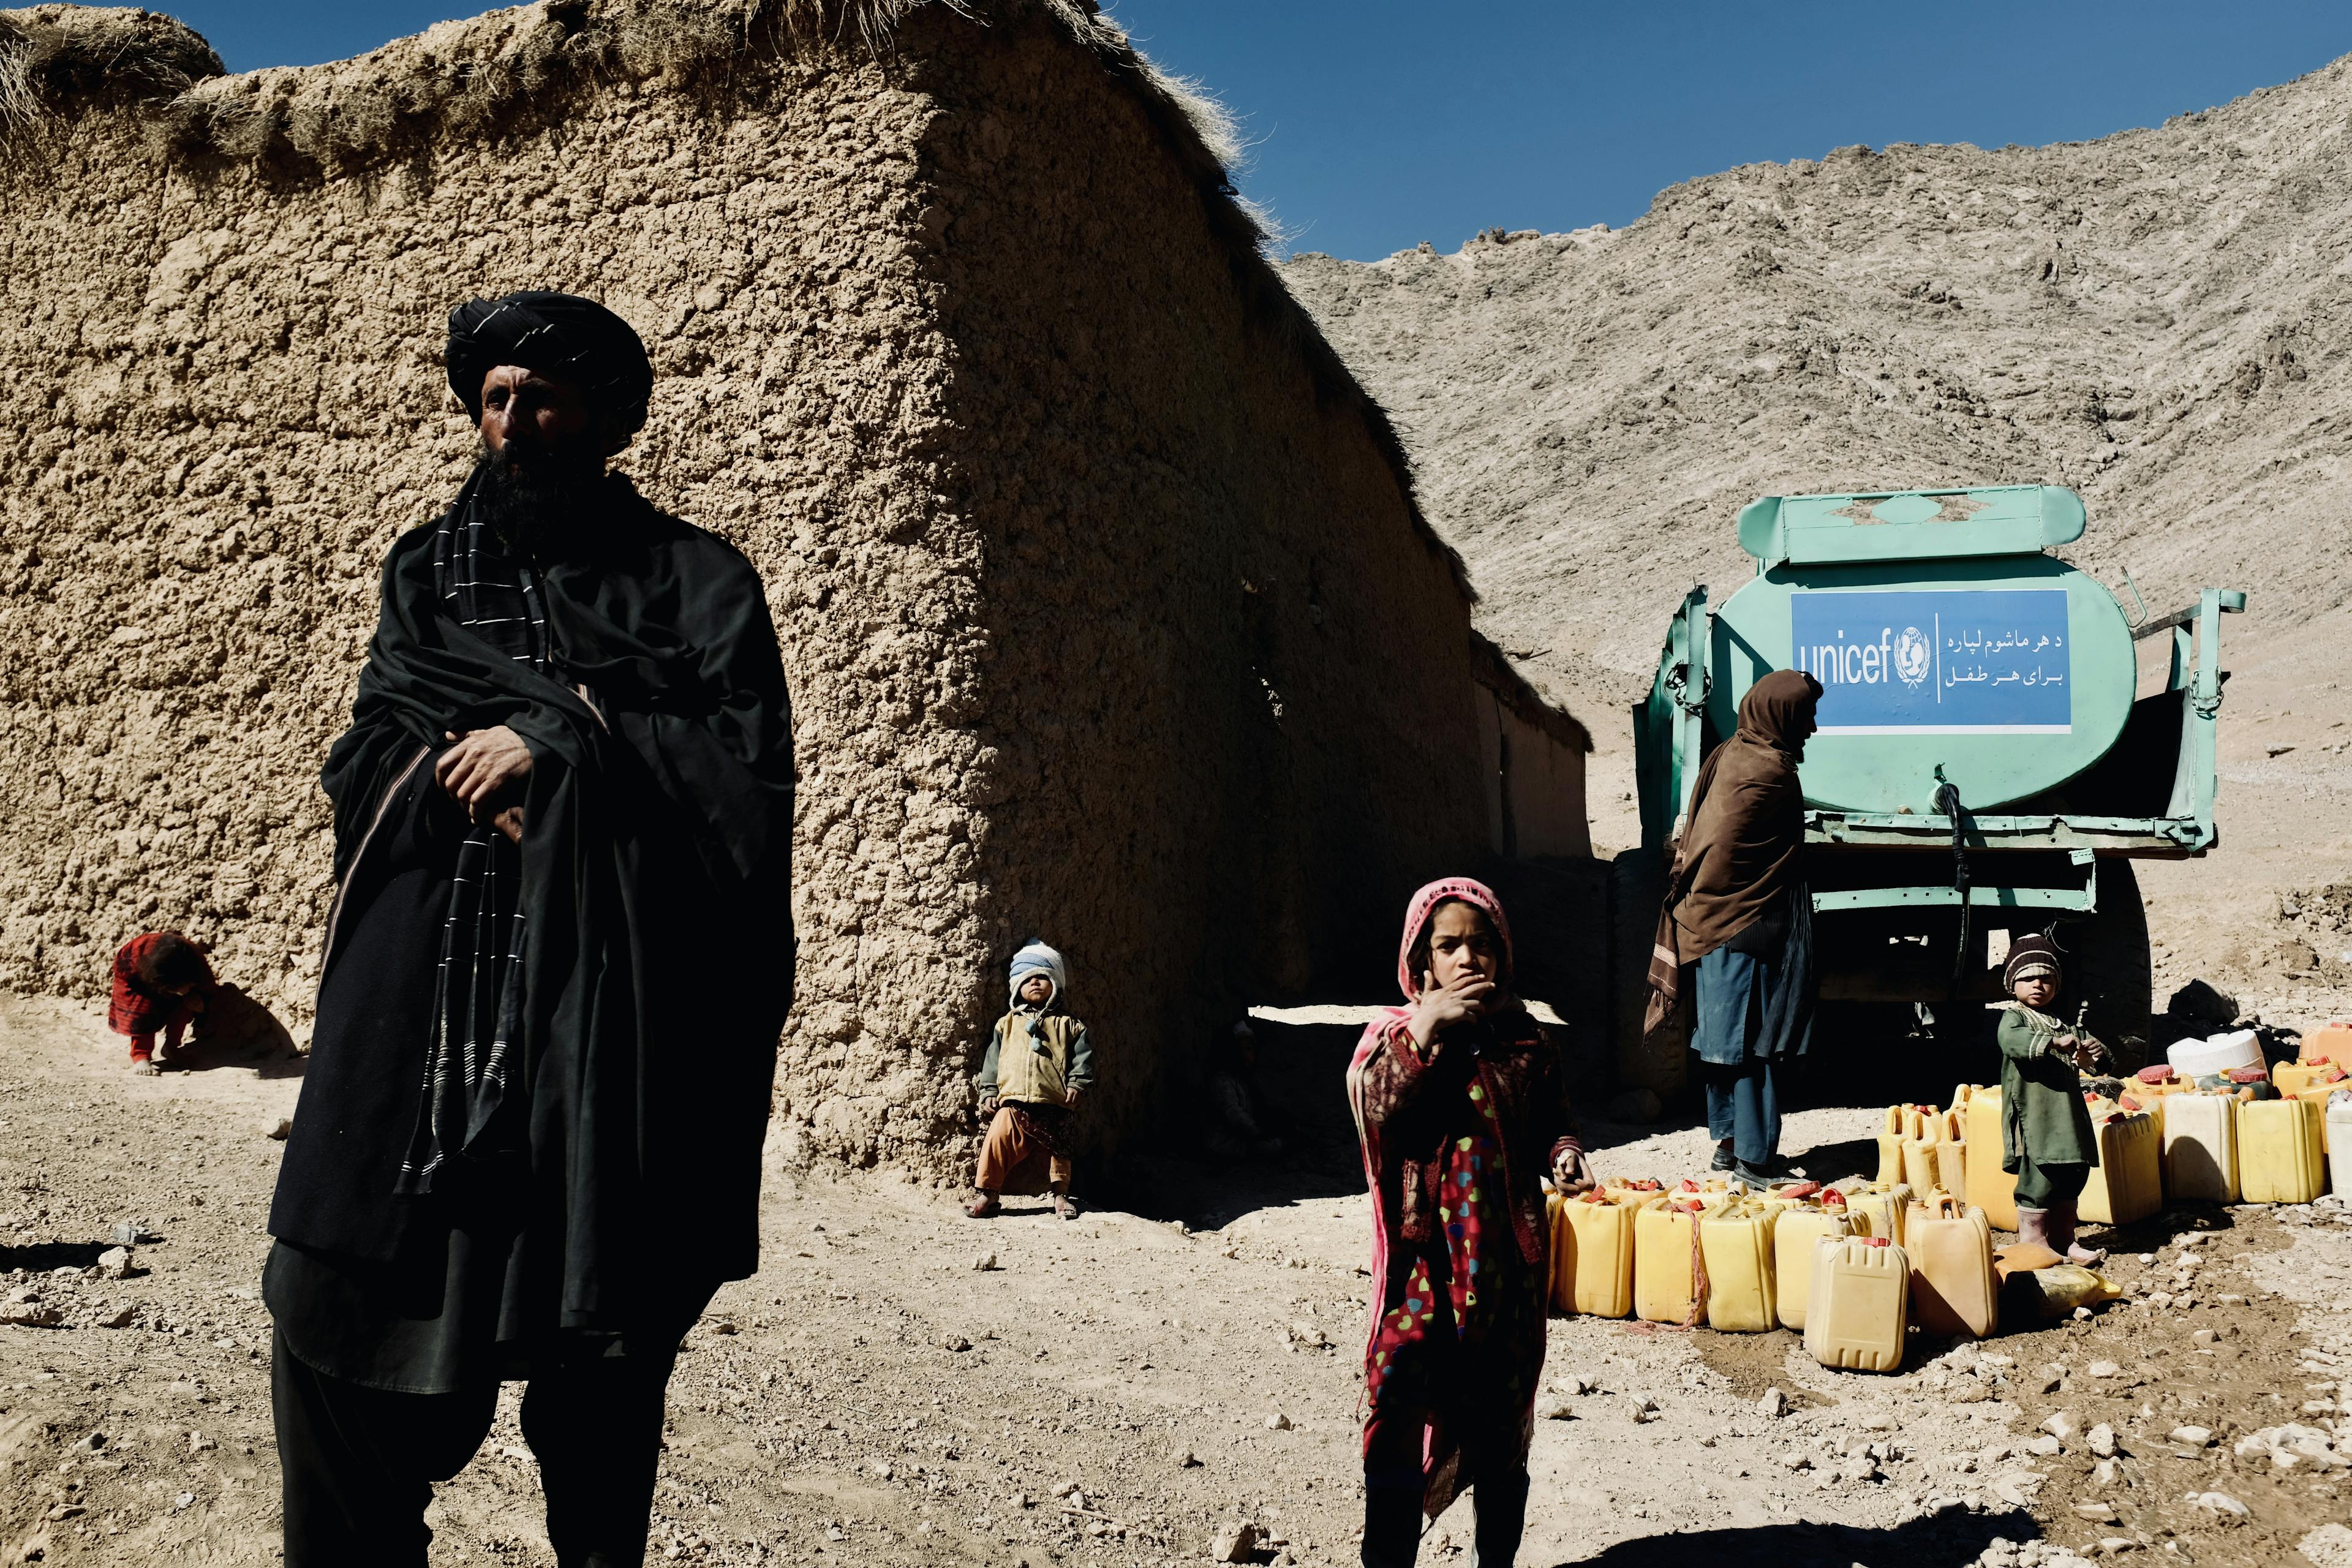 55-year-old Najeeb (left) and his 4 children by their house and UNICEF water truck. The family lost 3 children to drought.